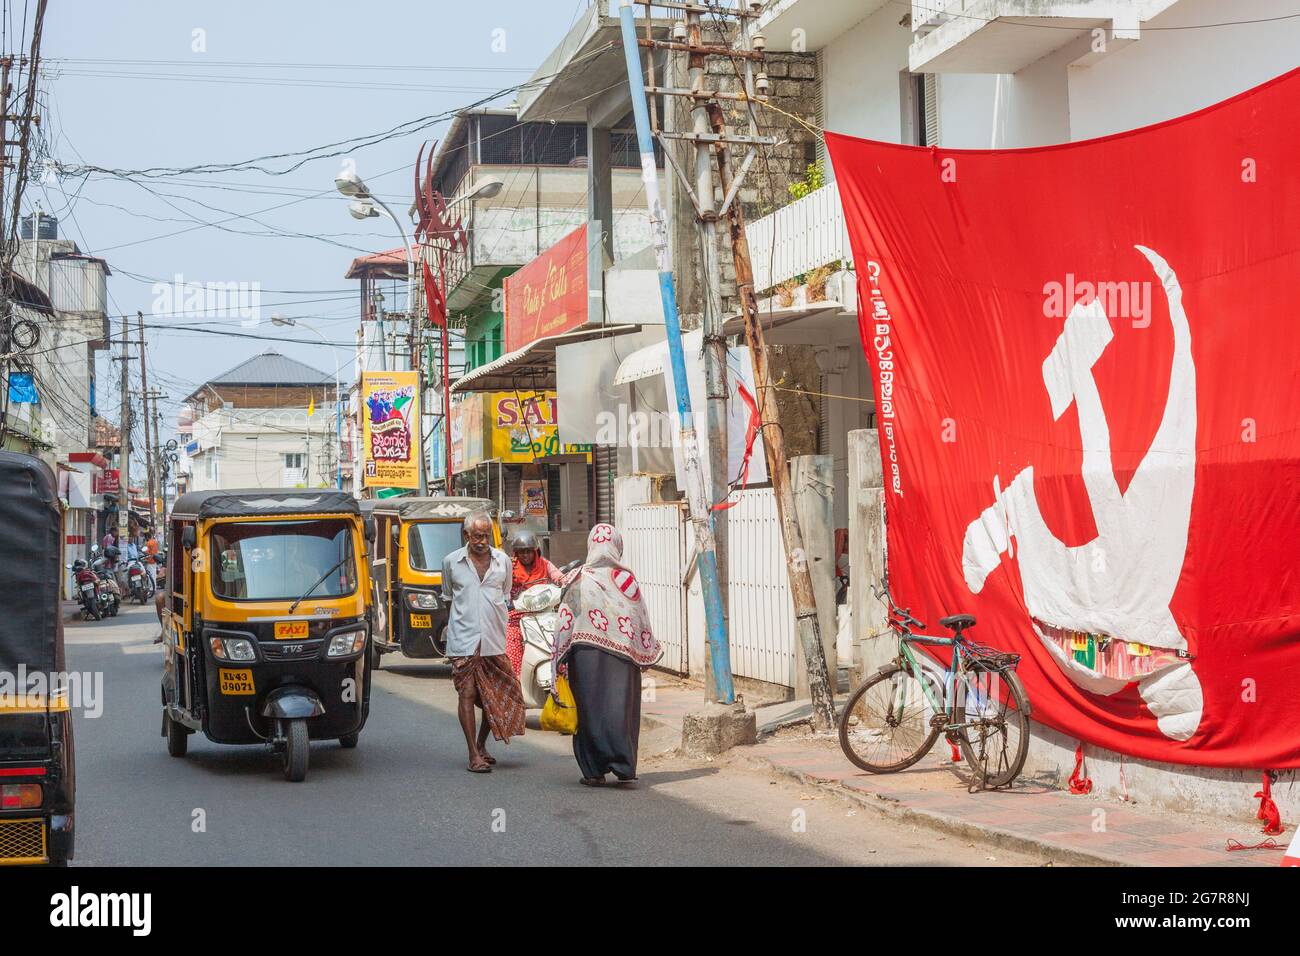 Huge hammer & sickle flag representing the CPI(M) Communist Party of Kerala hanging on street in Fort Kochi (Cochin), Kerala, India Stock Photo